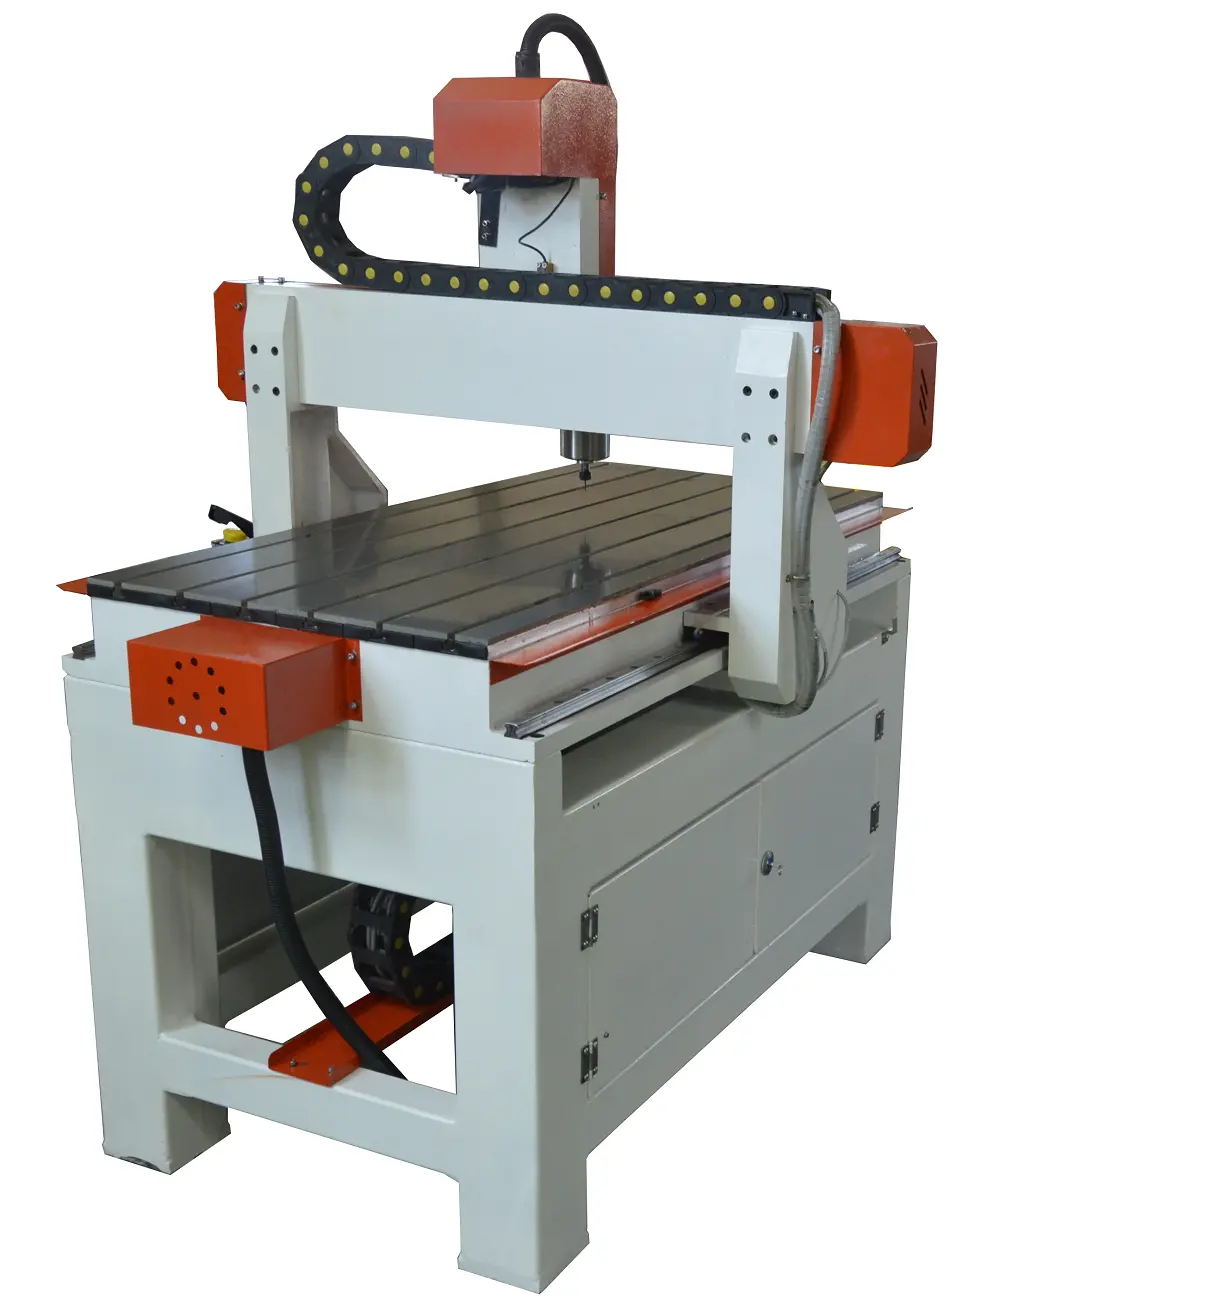 DISCOUNT high quality frame desktop small waterjet cutting machine high quality machines spindle motor turning cnc router made